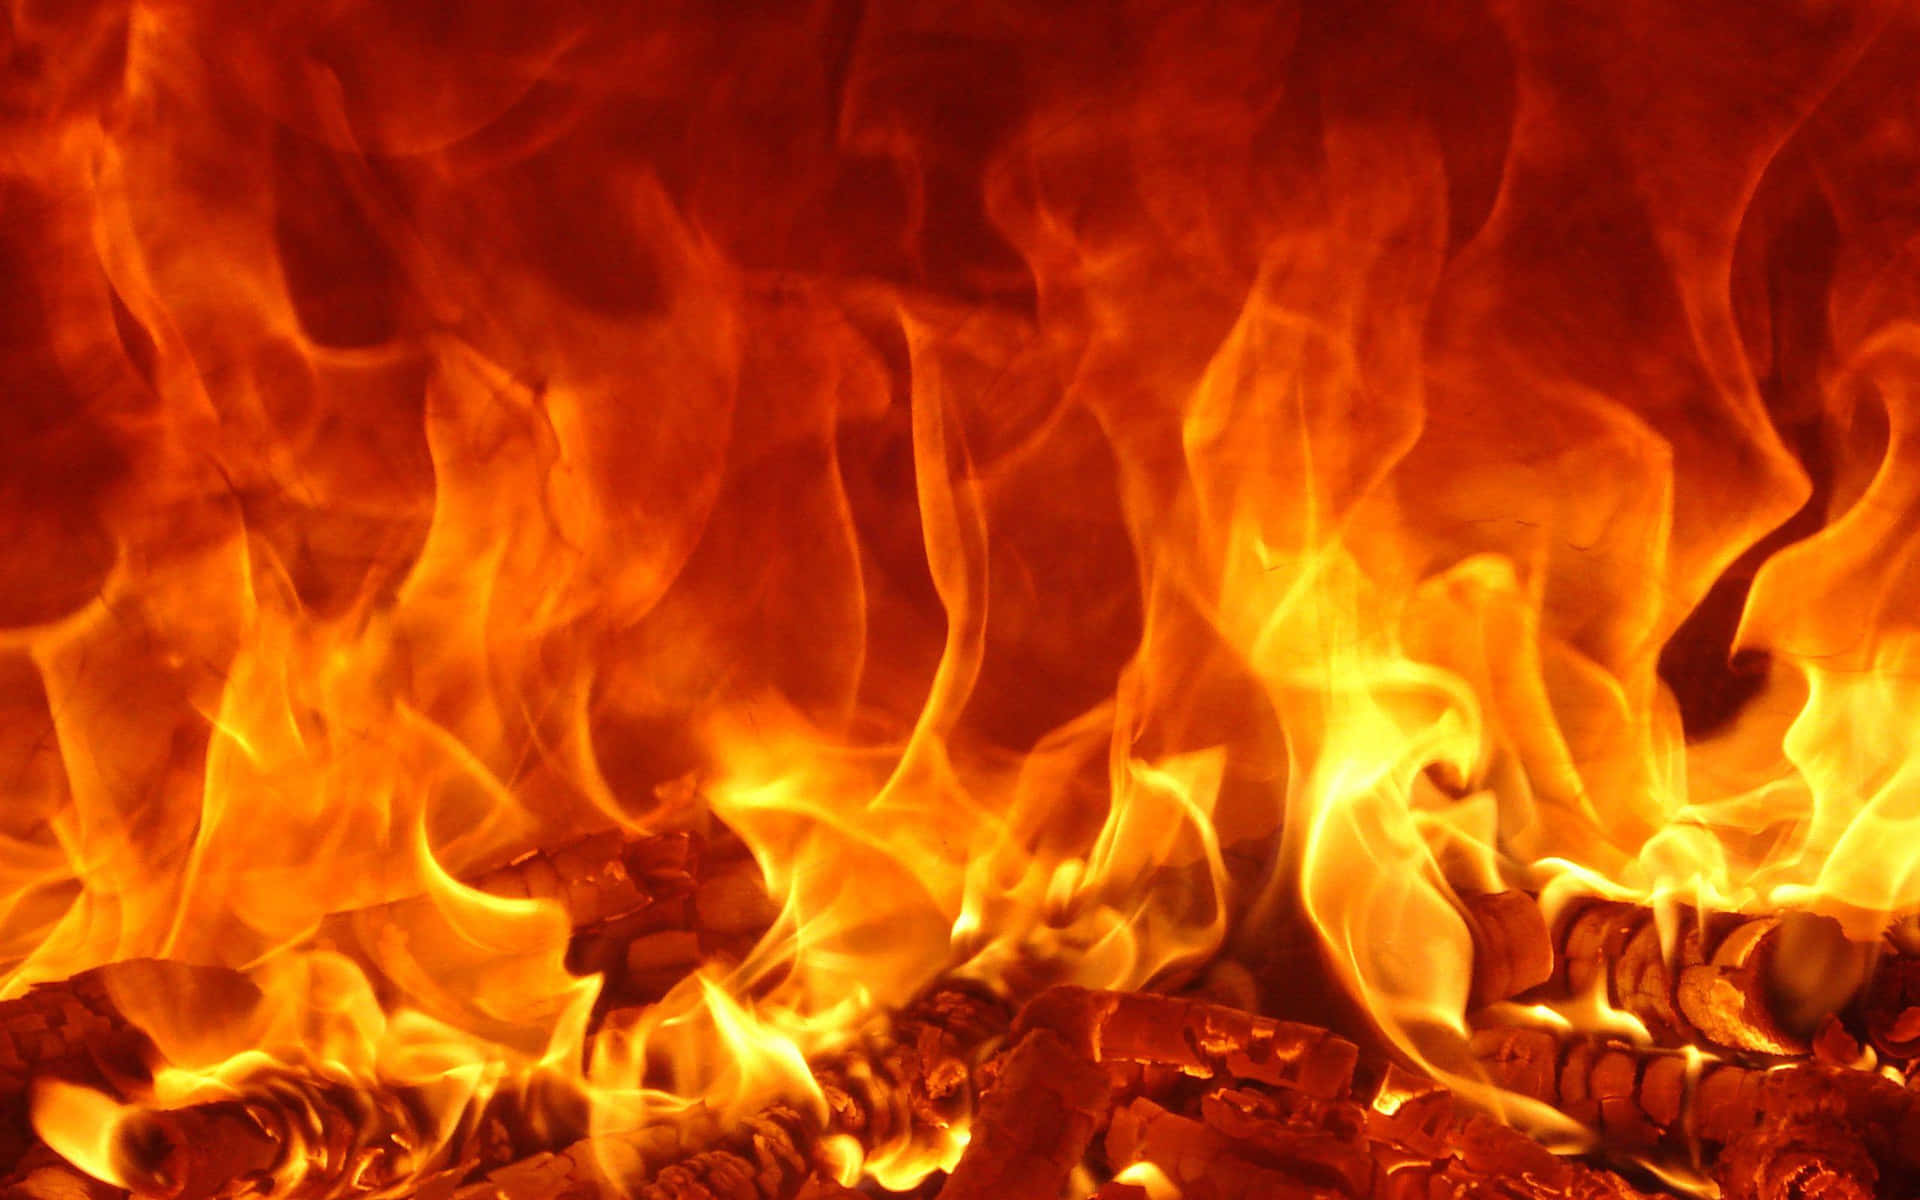 3D Fire: An explosion of flames in motion Wallpaper